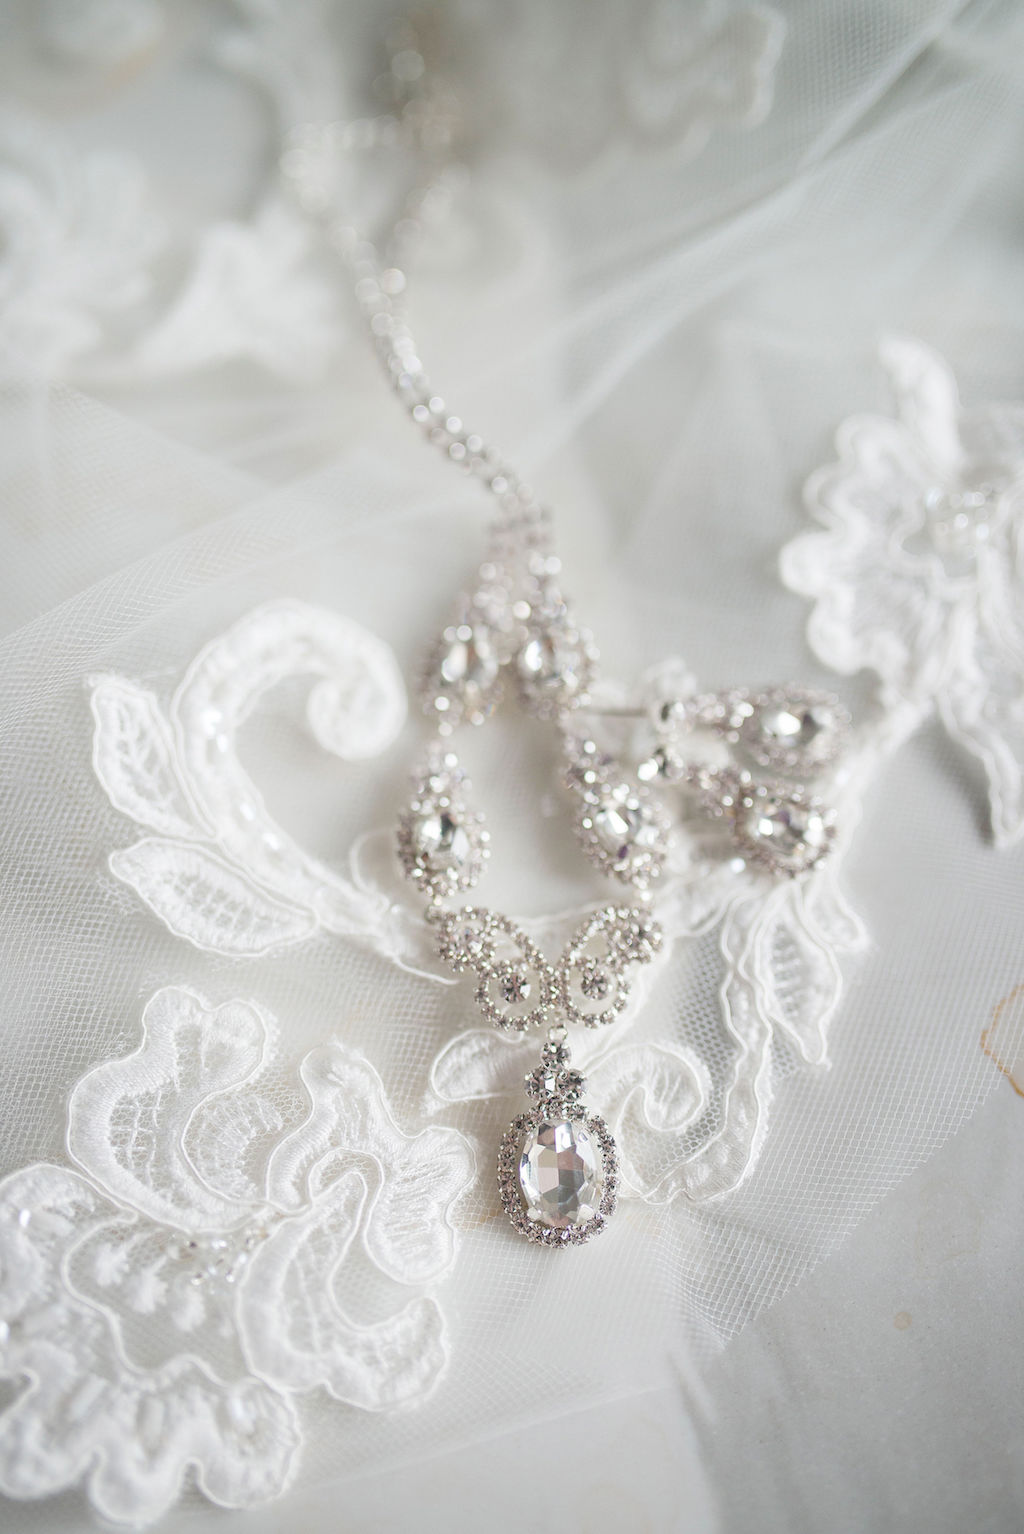 Diamond Drop Necklace and Earrings on Lace and Tulle Veil | Tampa Bay Wedding Photographer Kristen Marie Photography